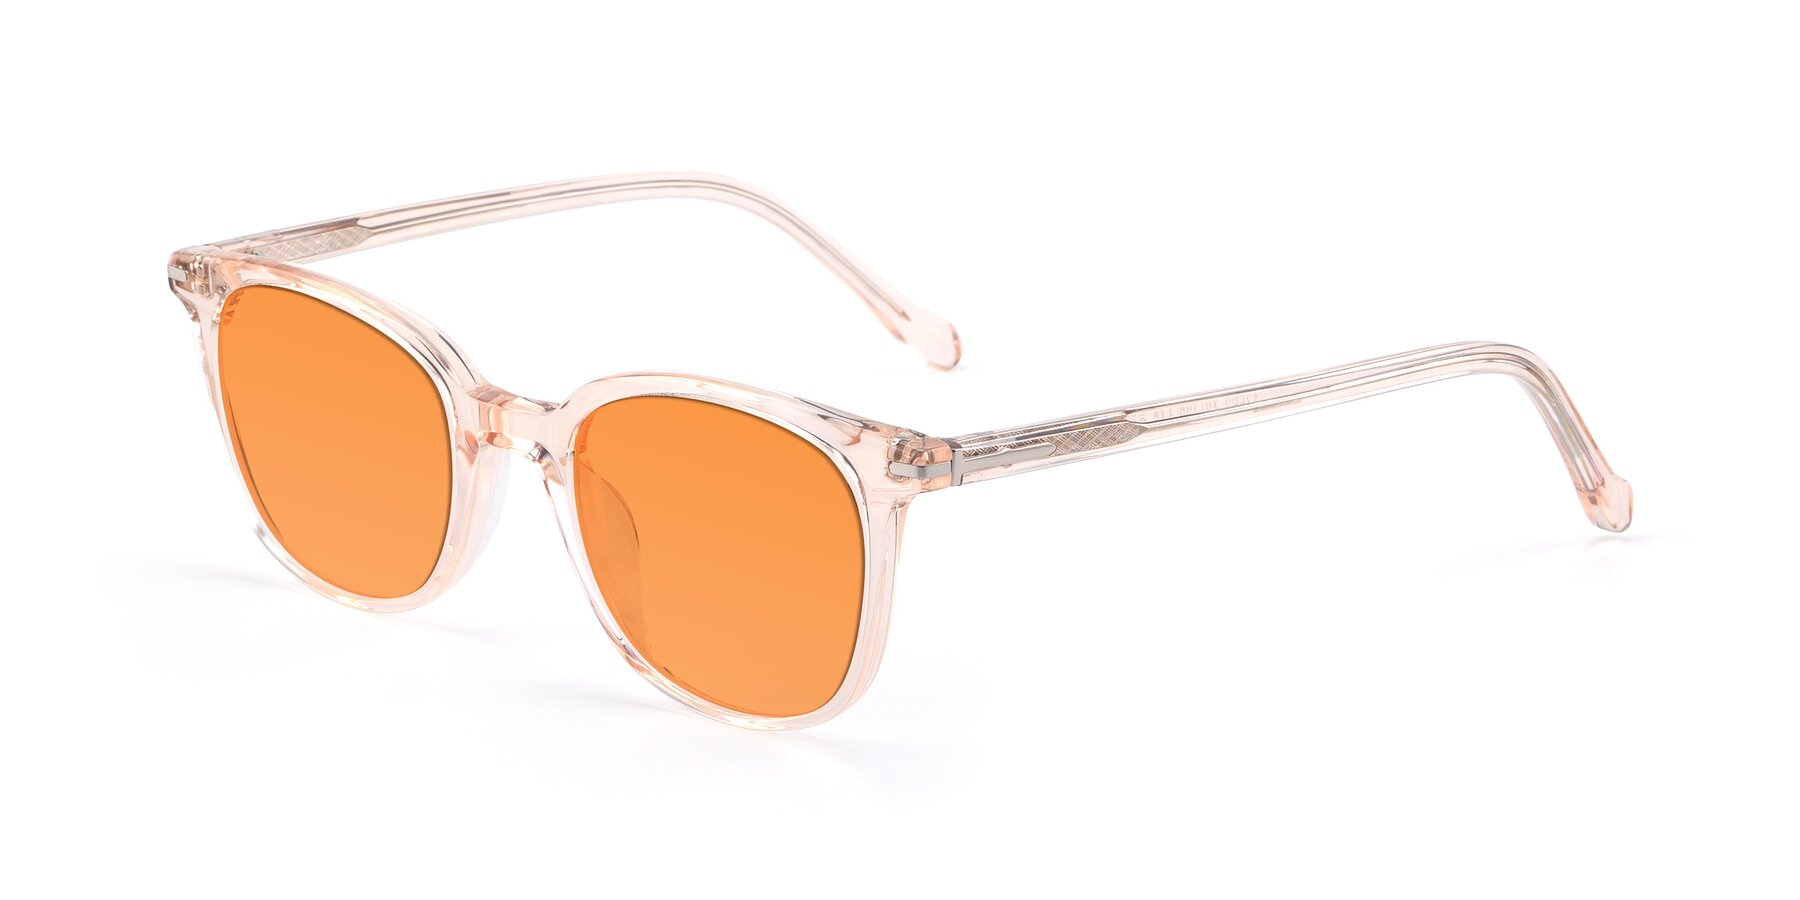 Angle of 17562 in Transparent Pink with Orange Tinted Lenses